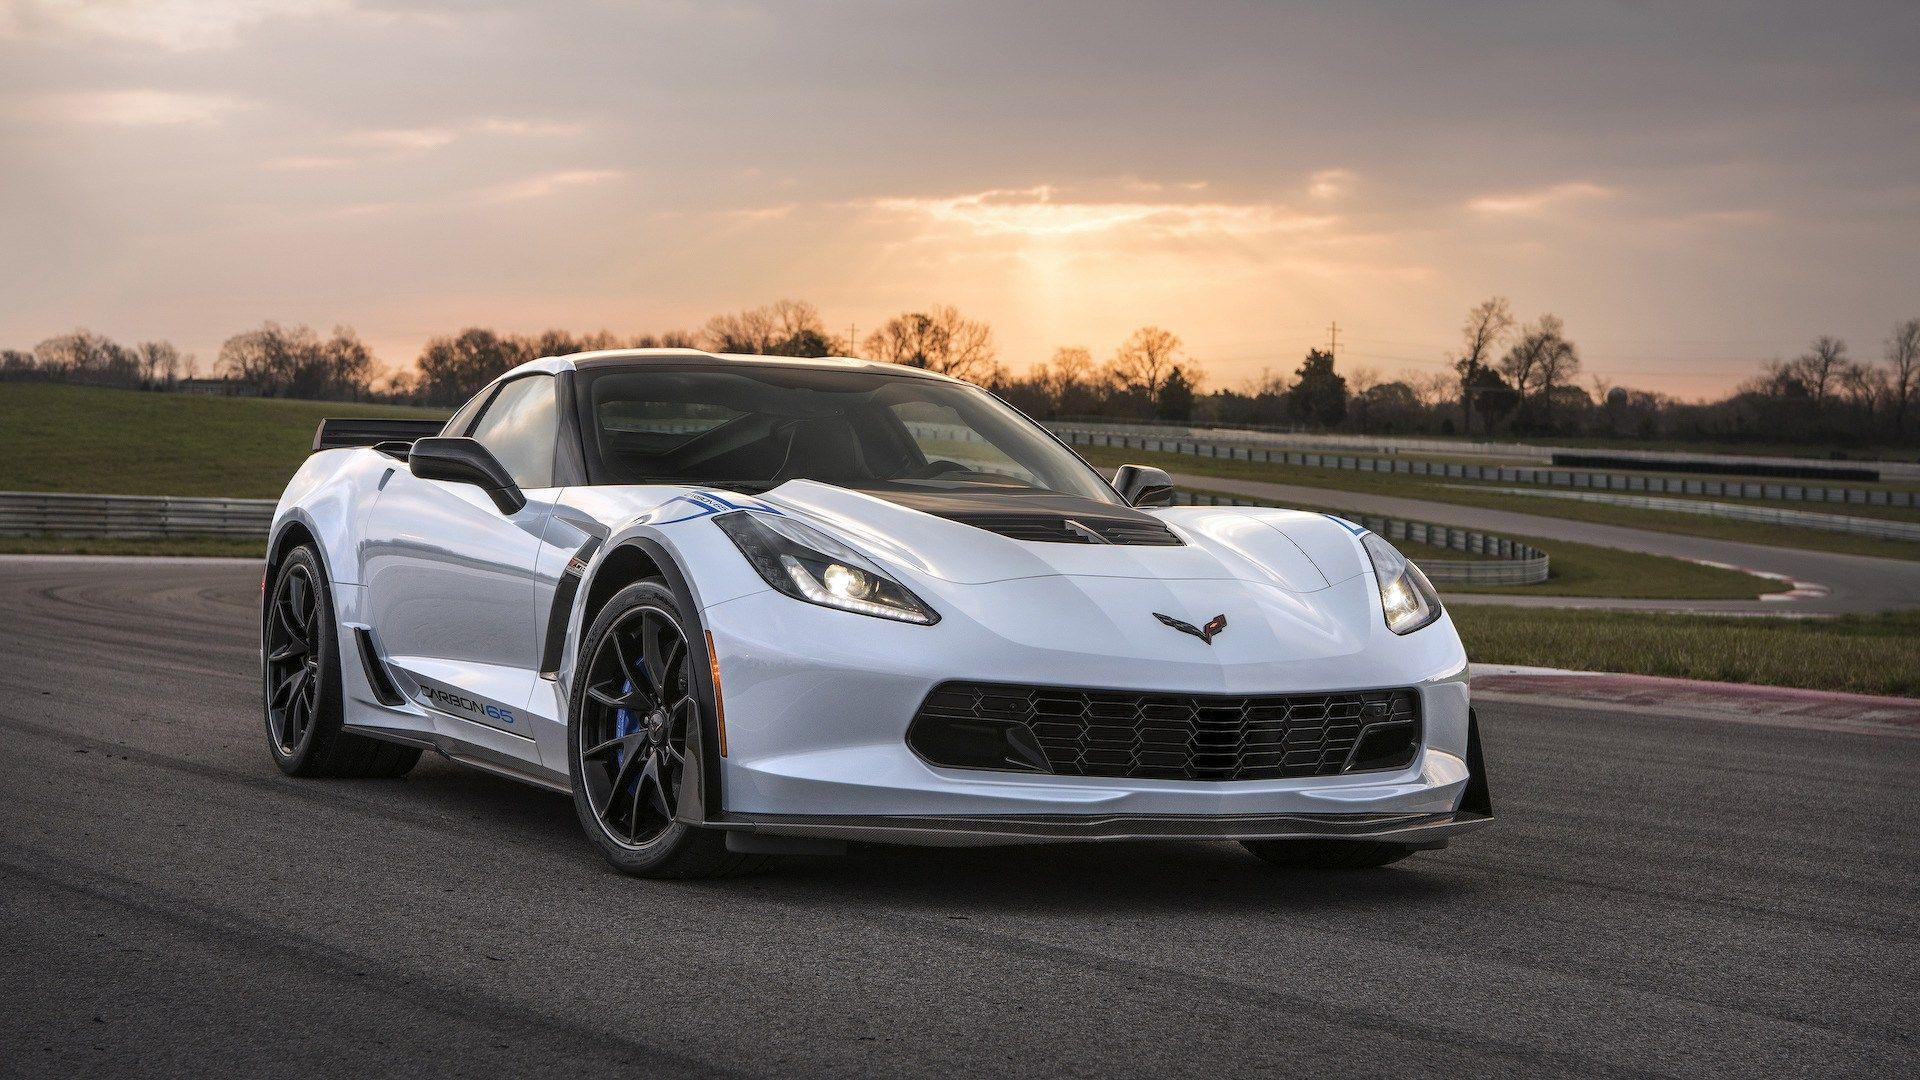 Chevy Corvette Grand Sport Engine, Price and Release Date